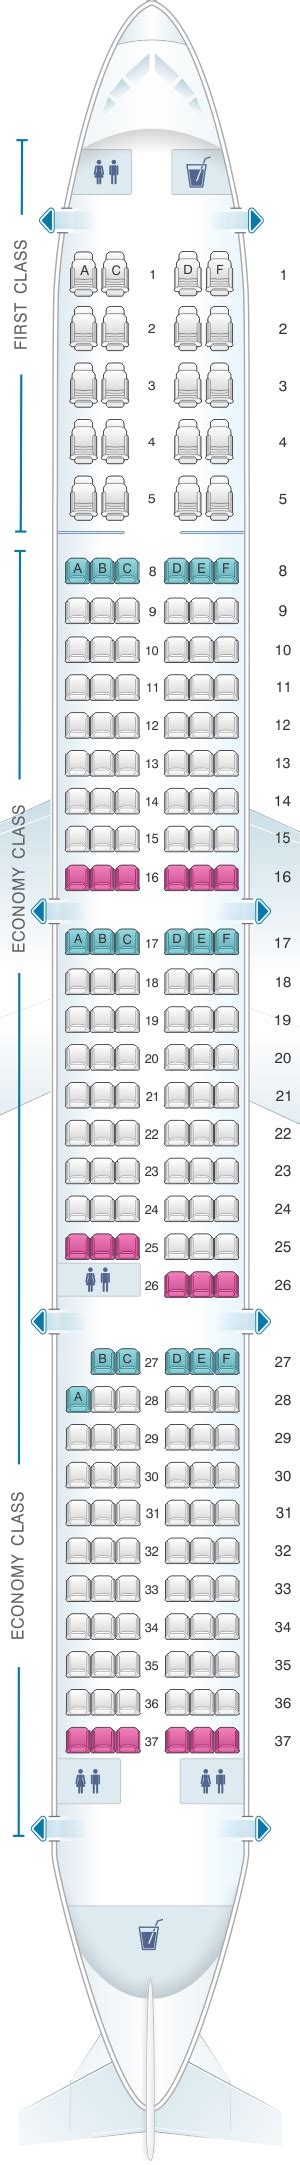 A320 Seat Map American Airlines